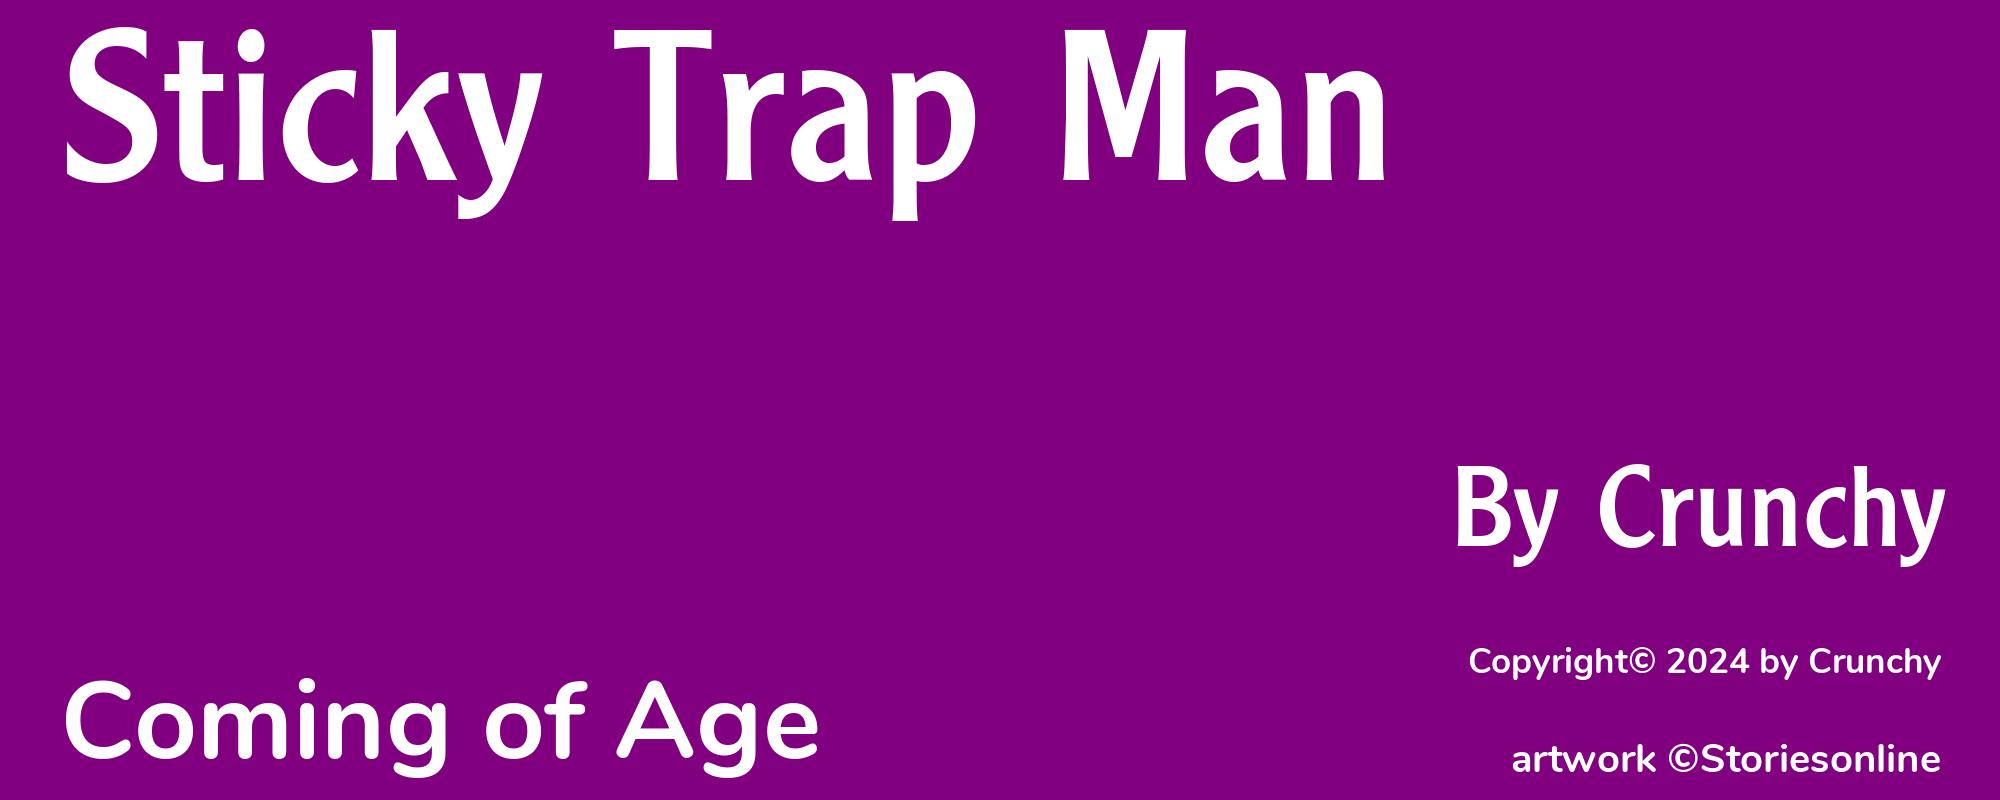 Sticky Trap Man - Cover